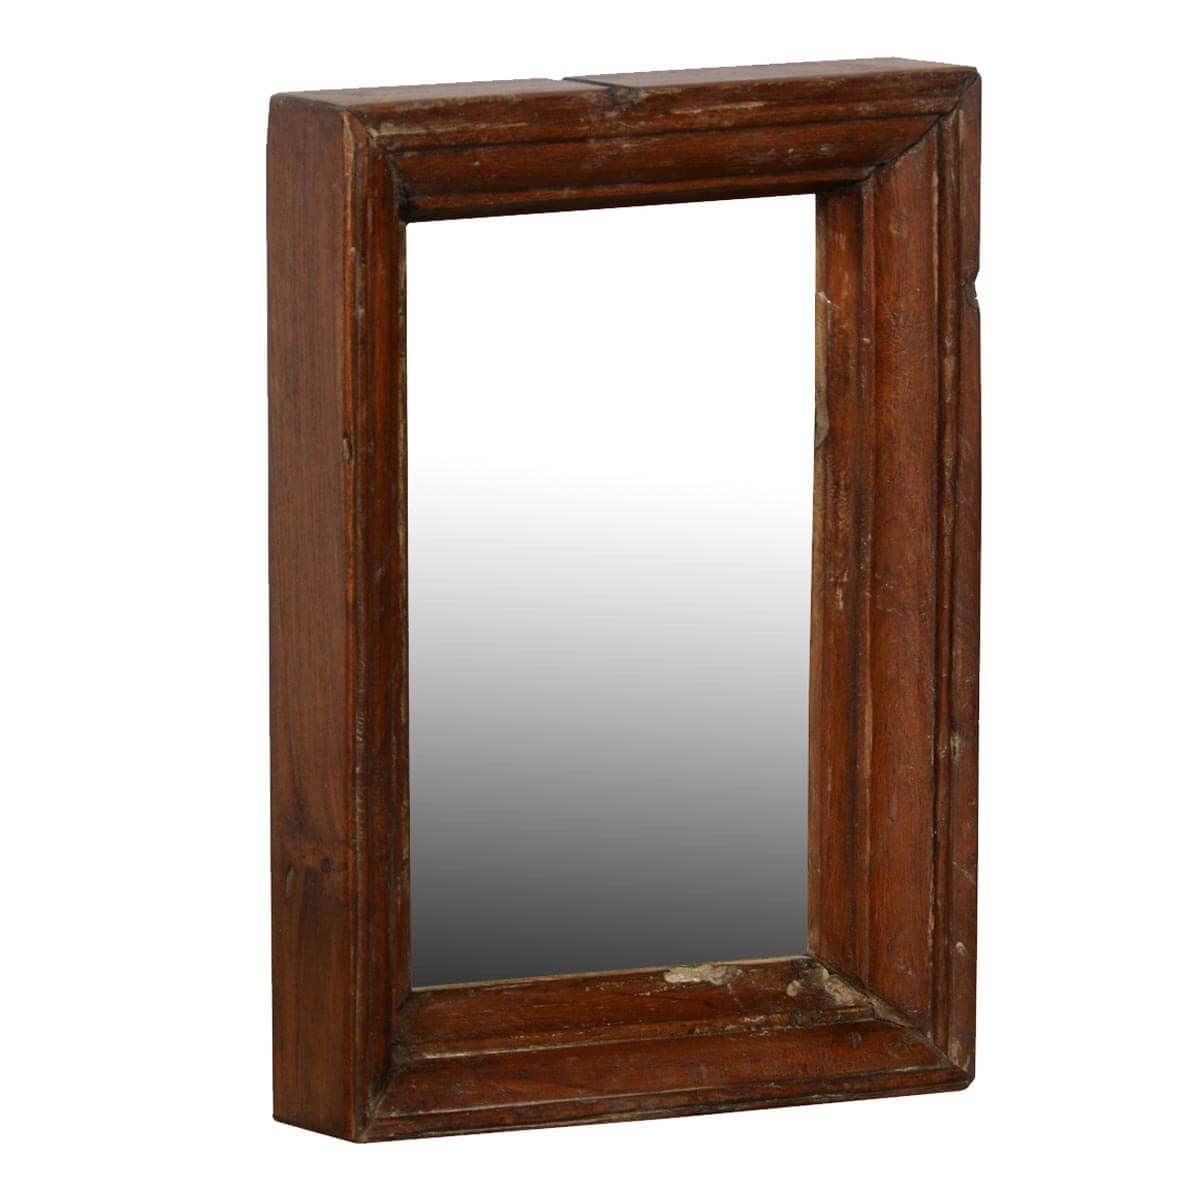 Rustic Farmhouse Reclaimed Wood Handmade Wall Mirror Frame Pertaining To Iron Frame Handcrafted Wall Mirrors (View 2 of 15)